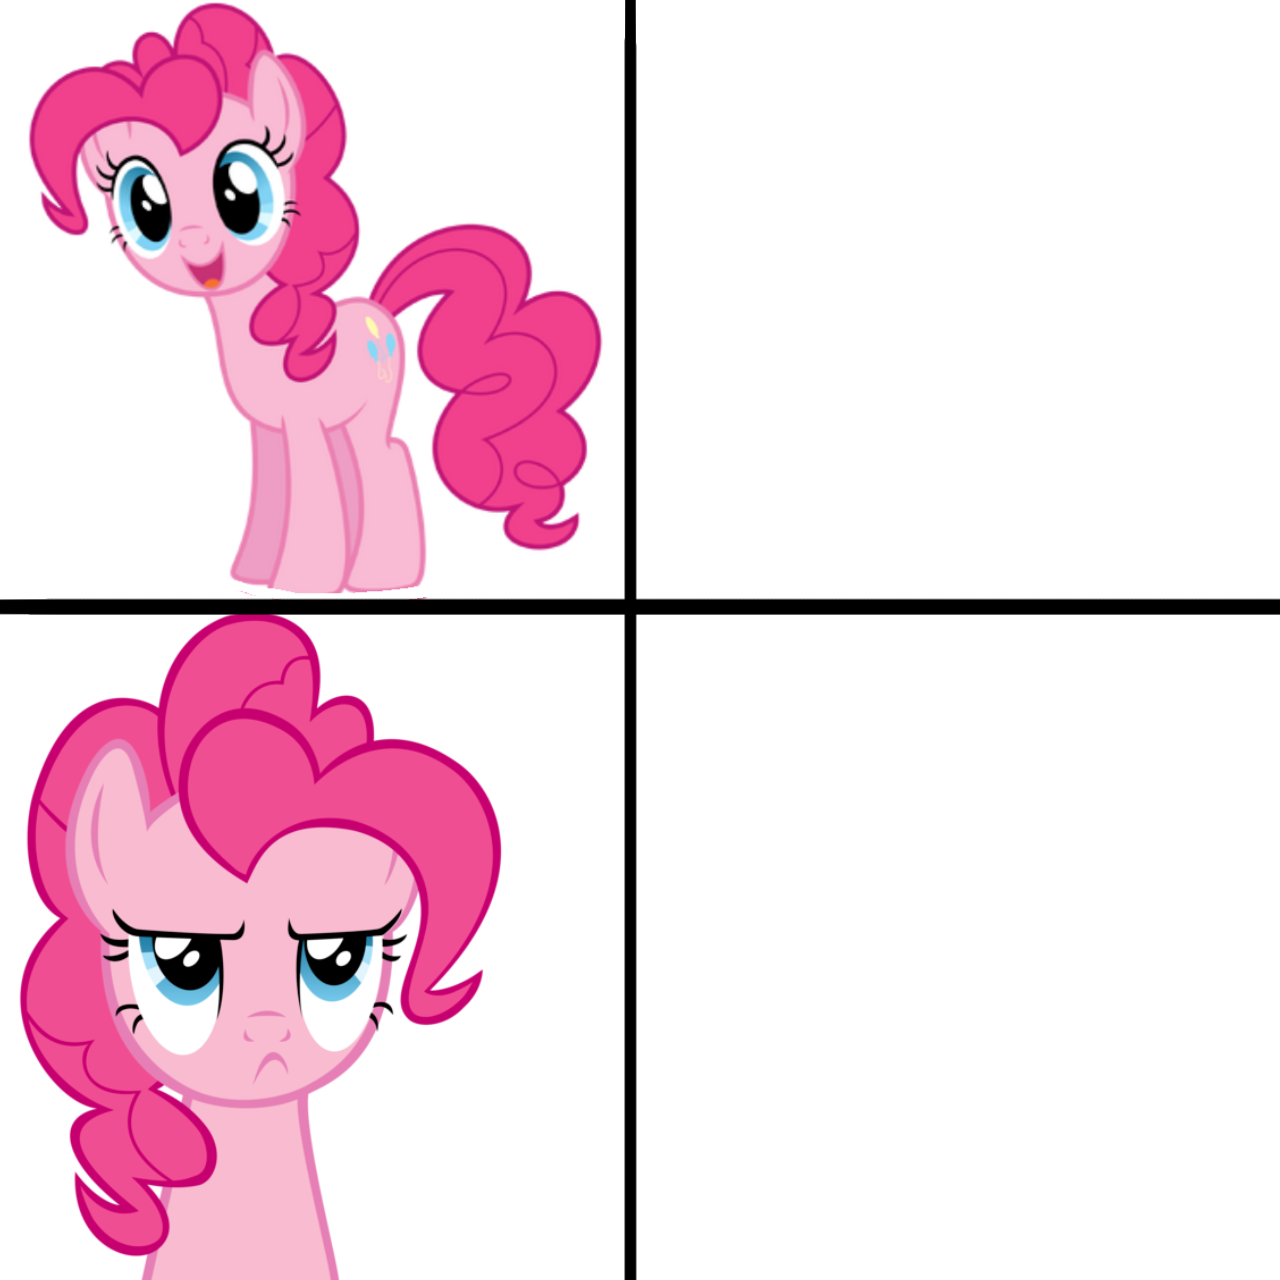 Pinkie Pie is disappointed Blank Meme Template